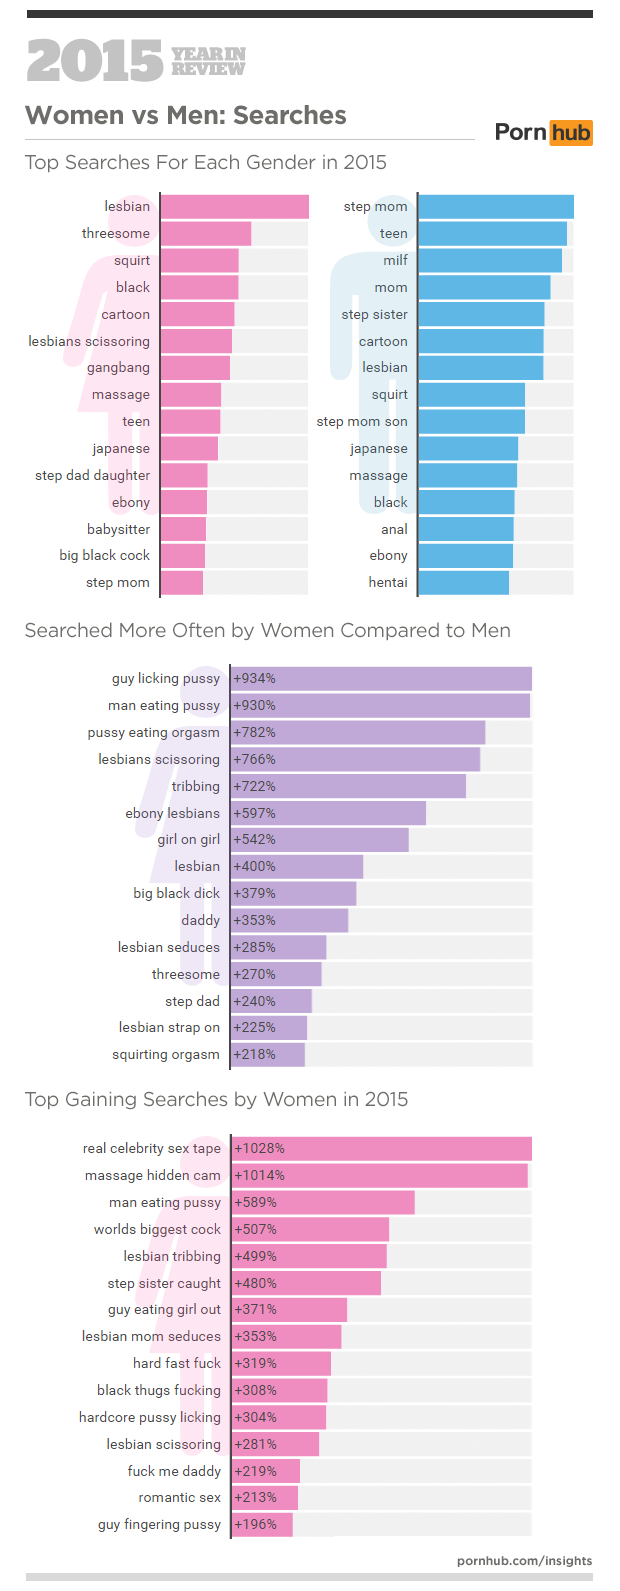 4-pornhub-insights-2015-year-in-review-female-male-searches.png